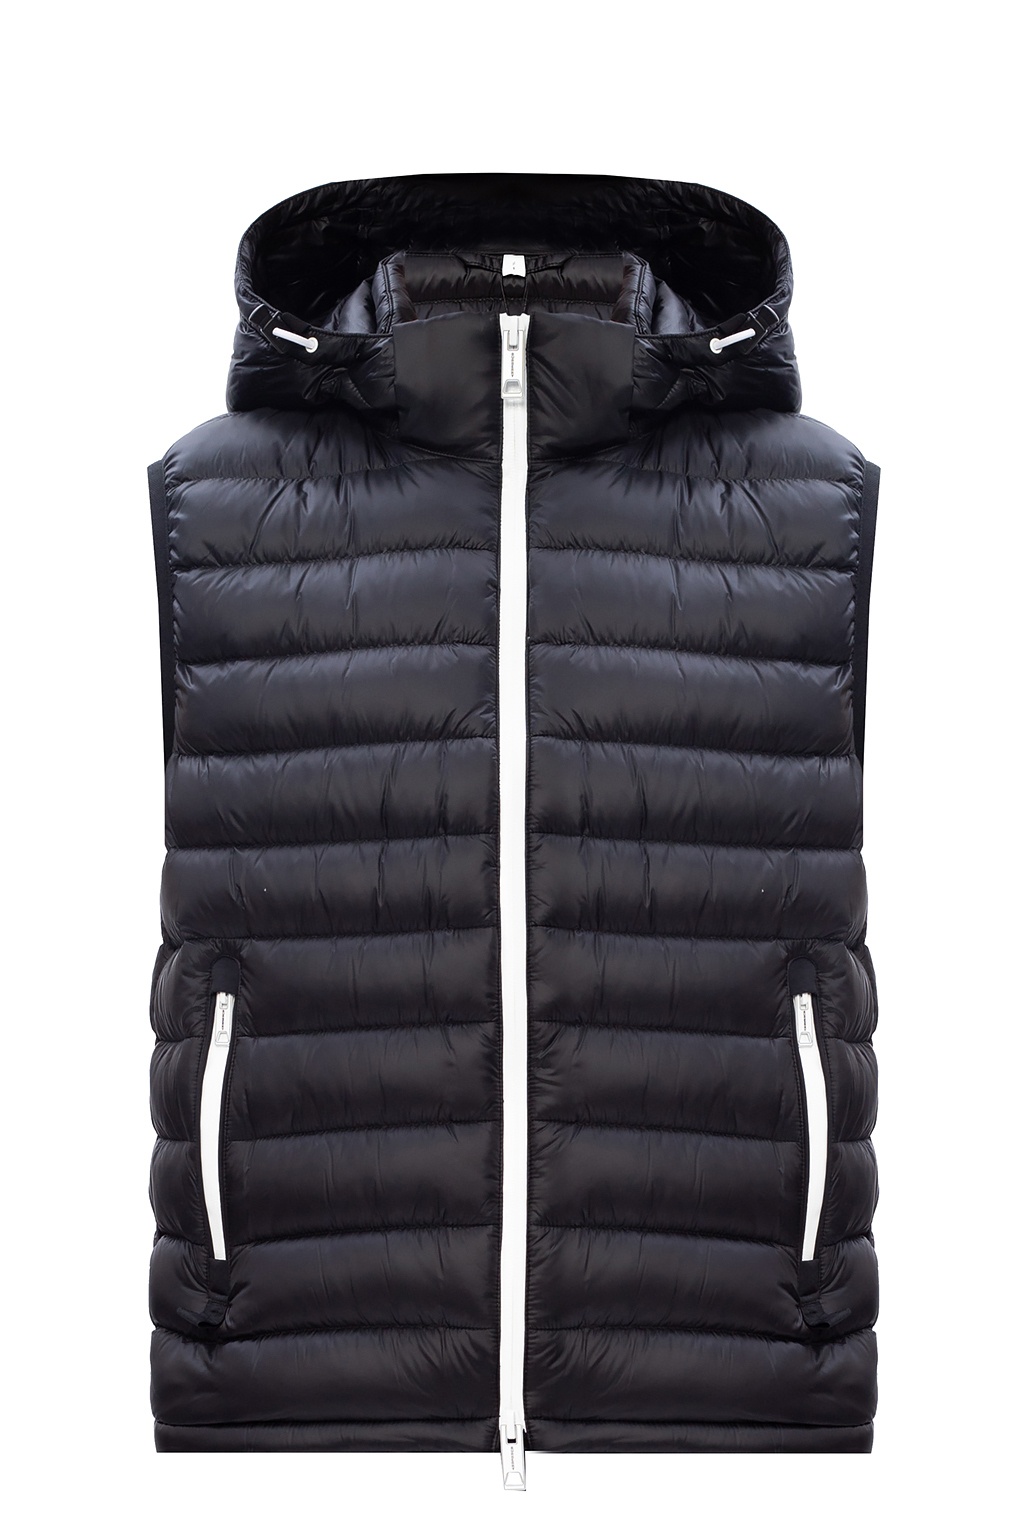 burberry quilted vest